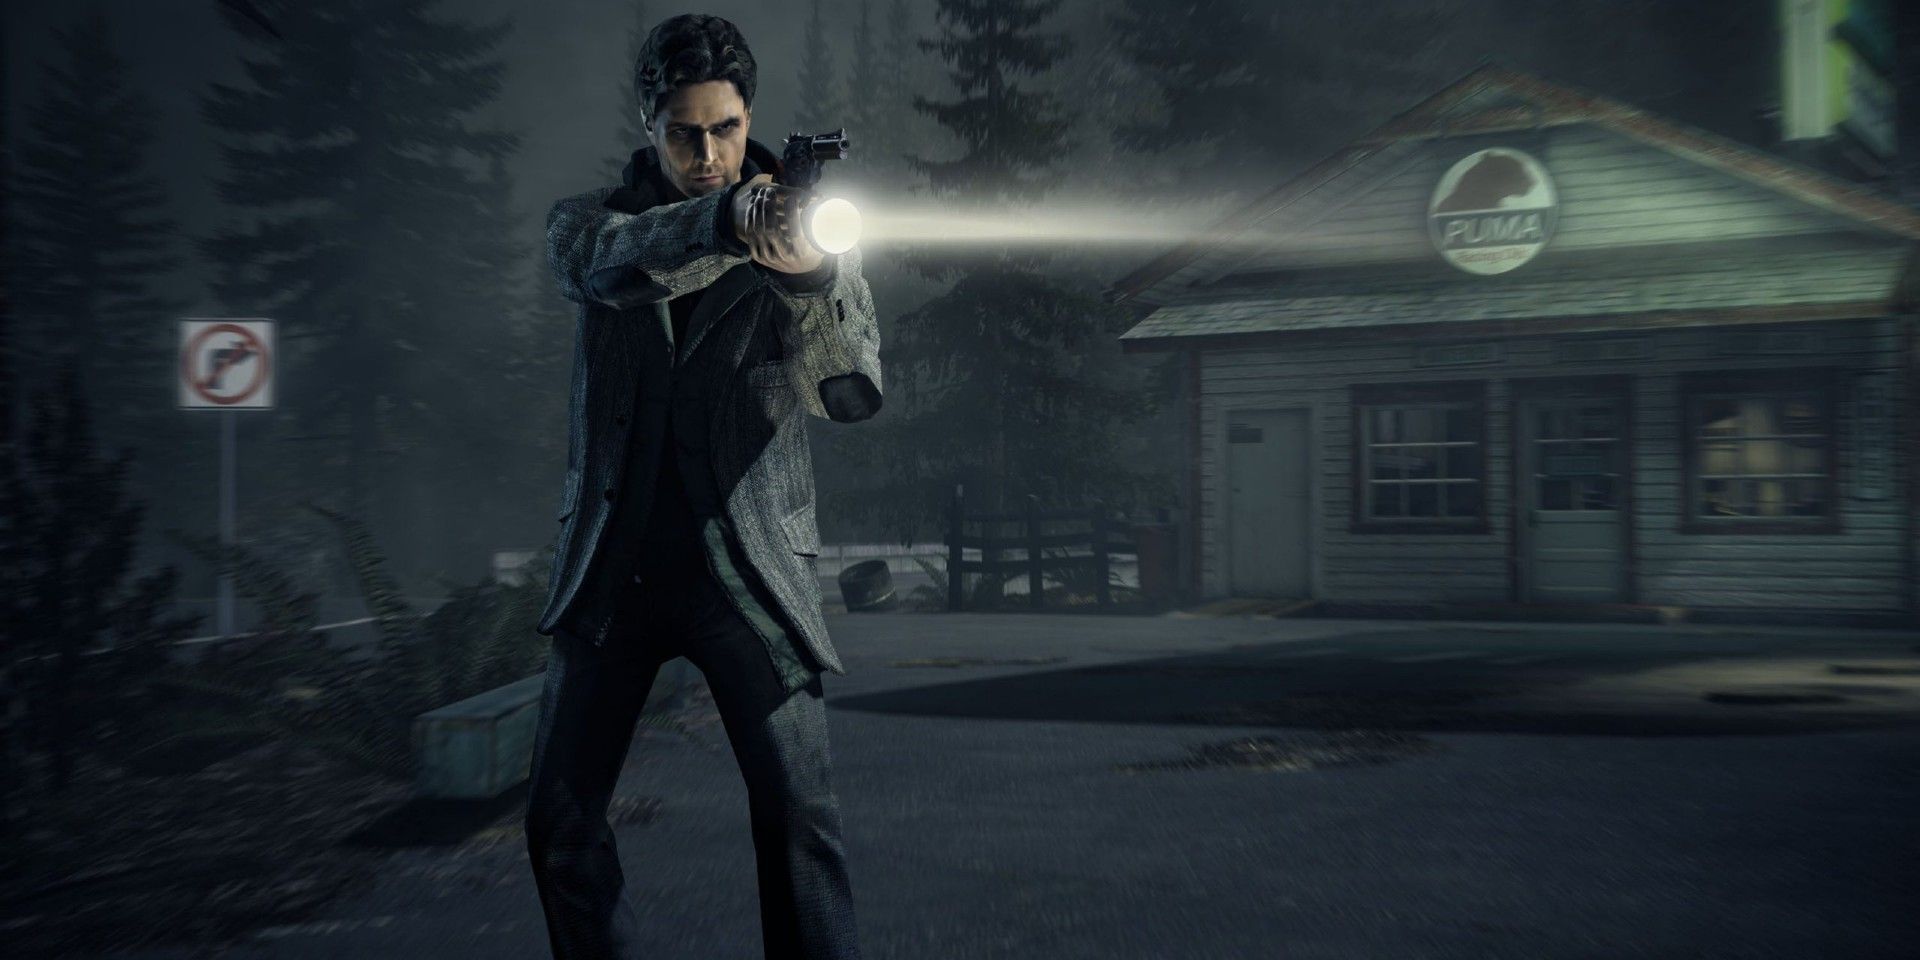 Alan Wake Remastered Coming To PC, Xbox, PlayStation This Fall